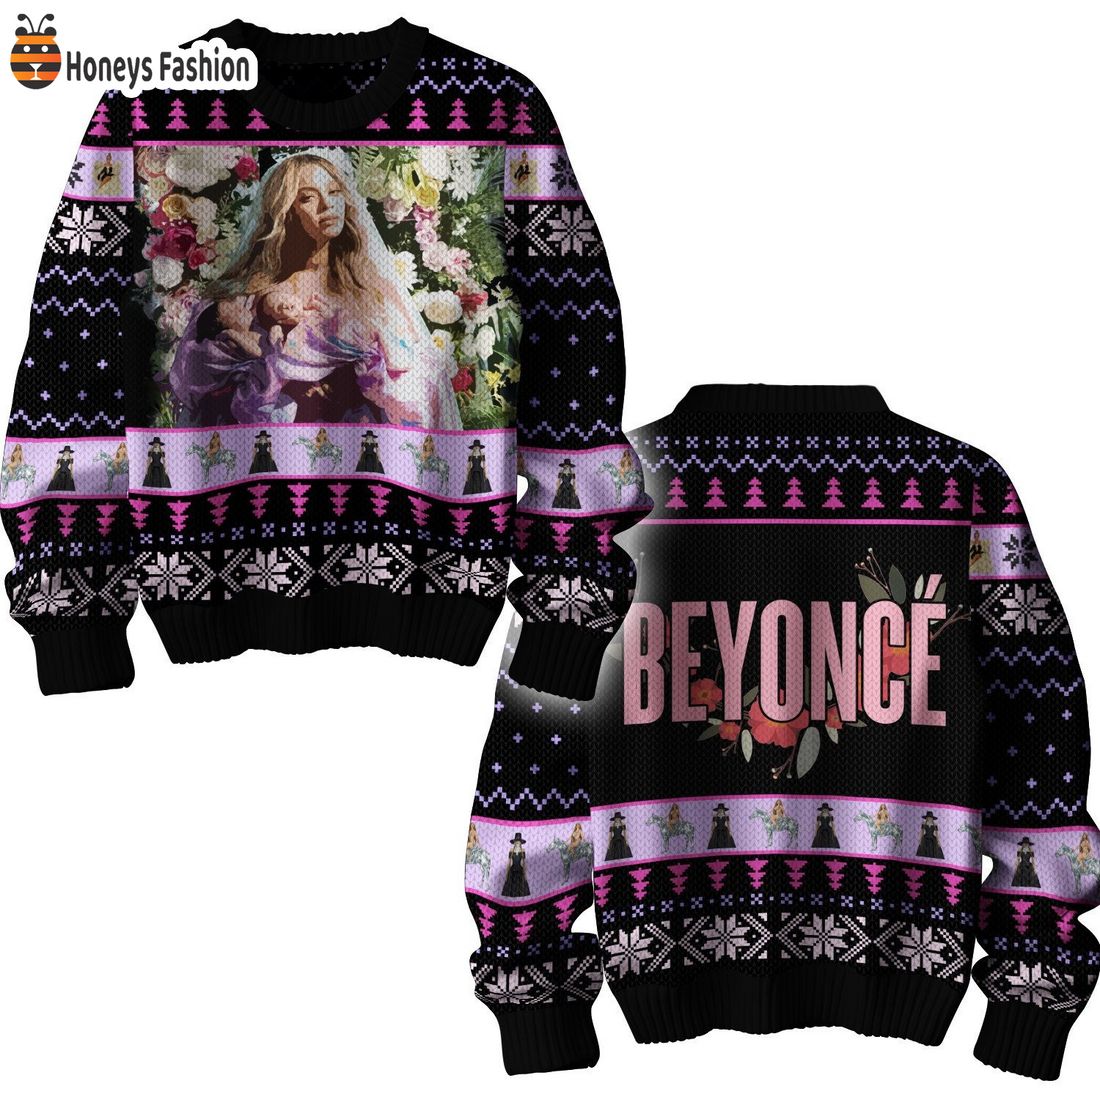 Beyonce Over Flower Ugly Christmas Sweater